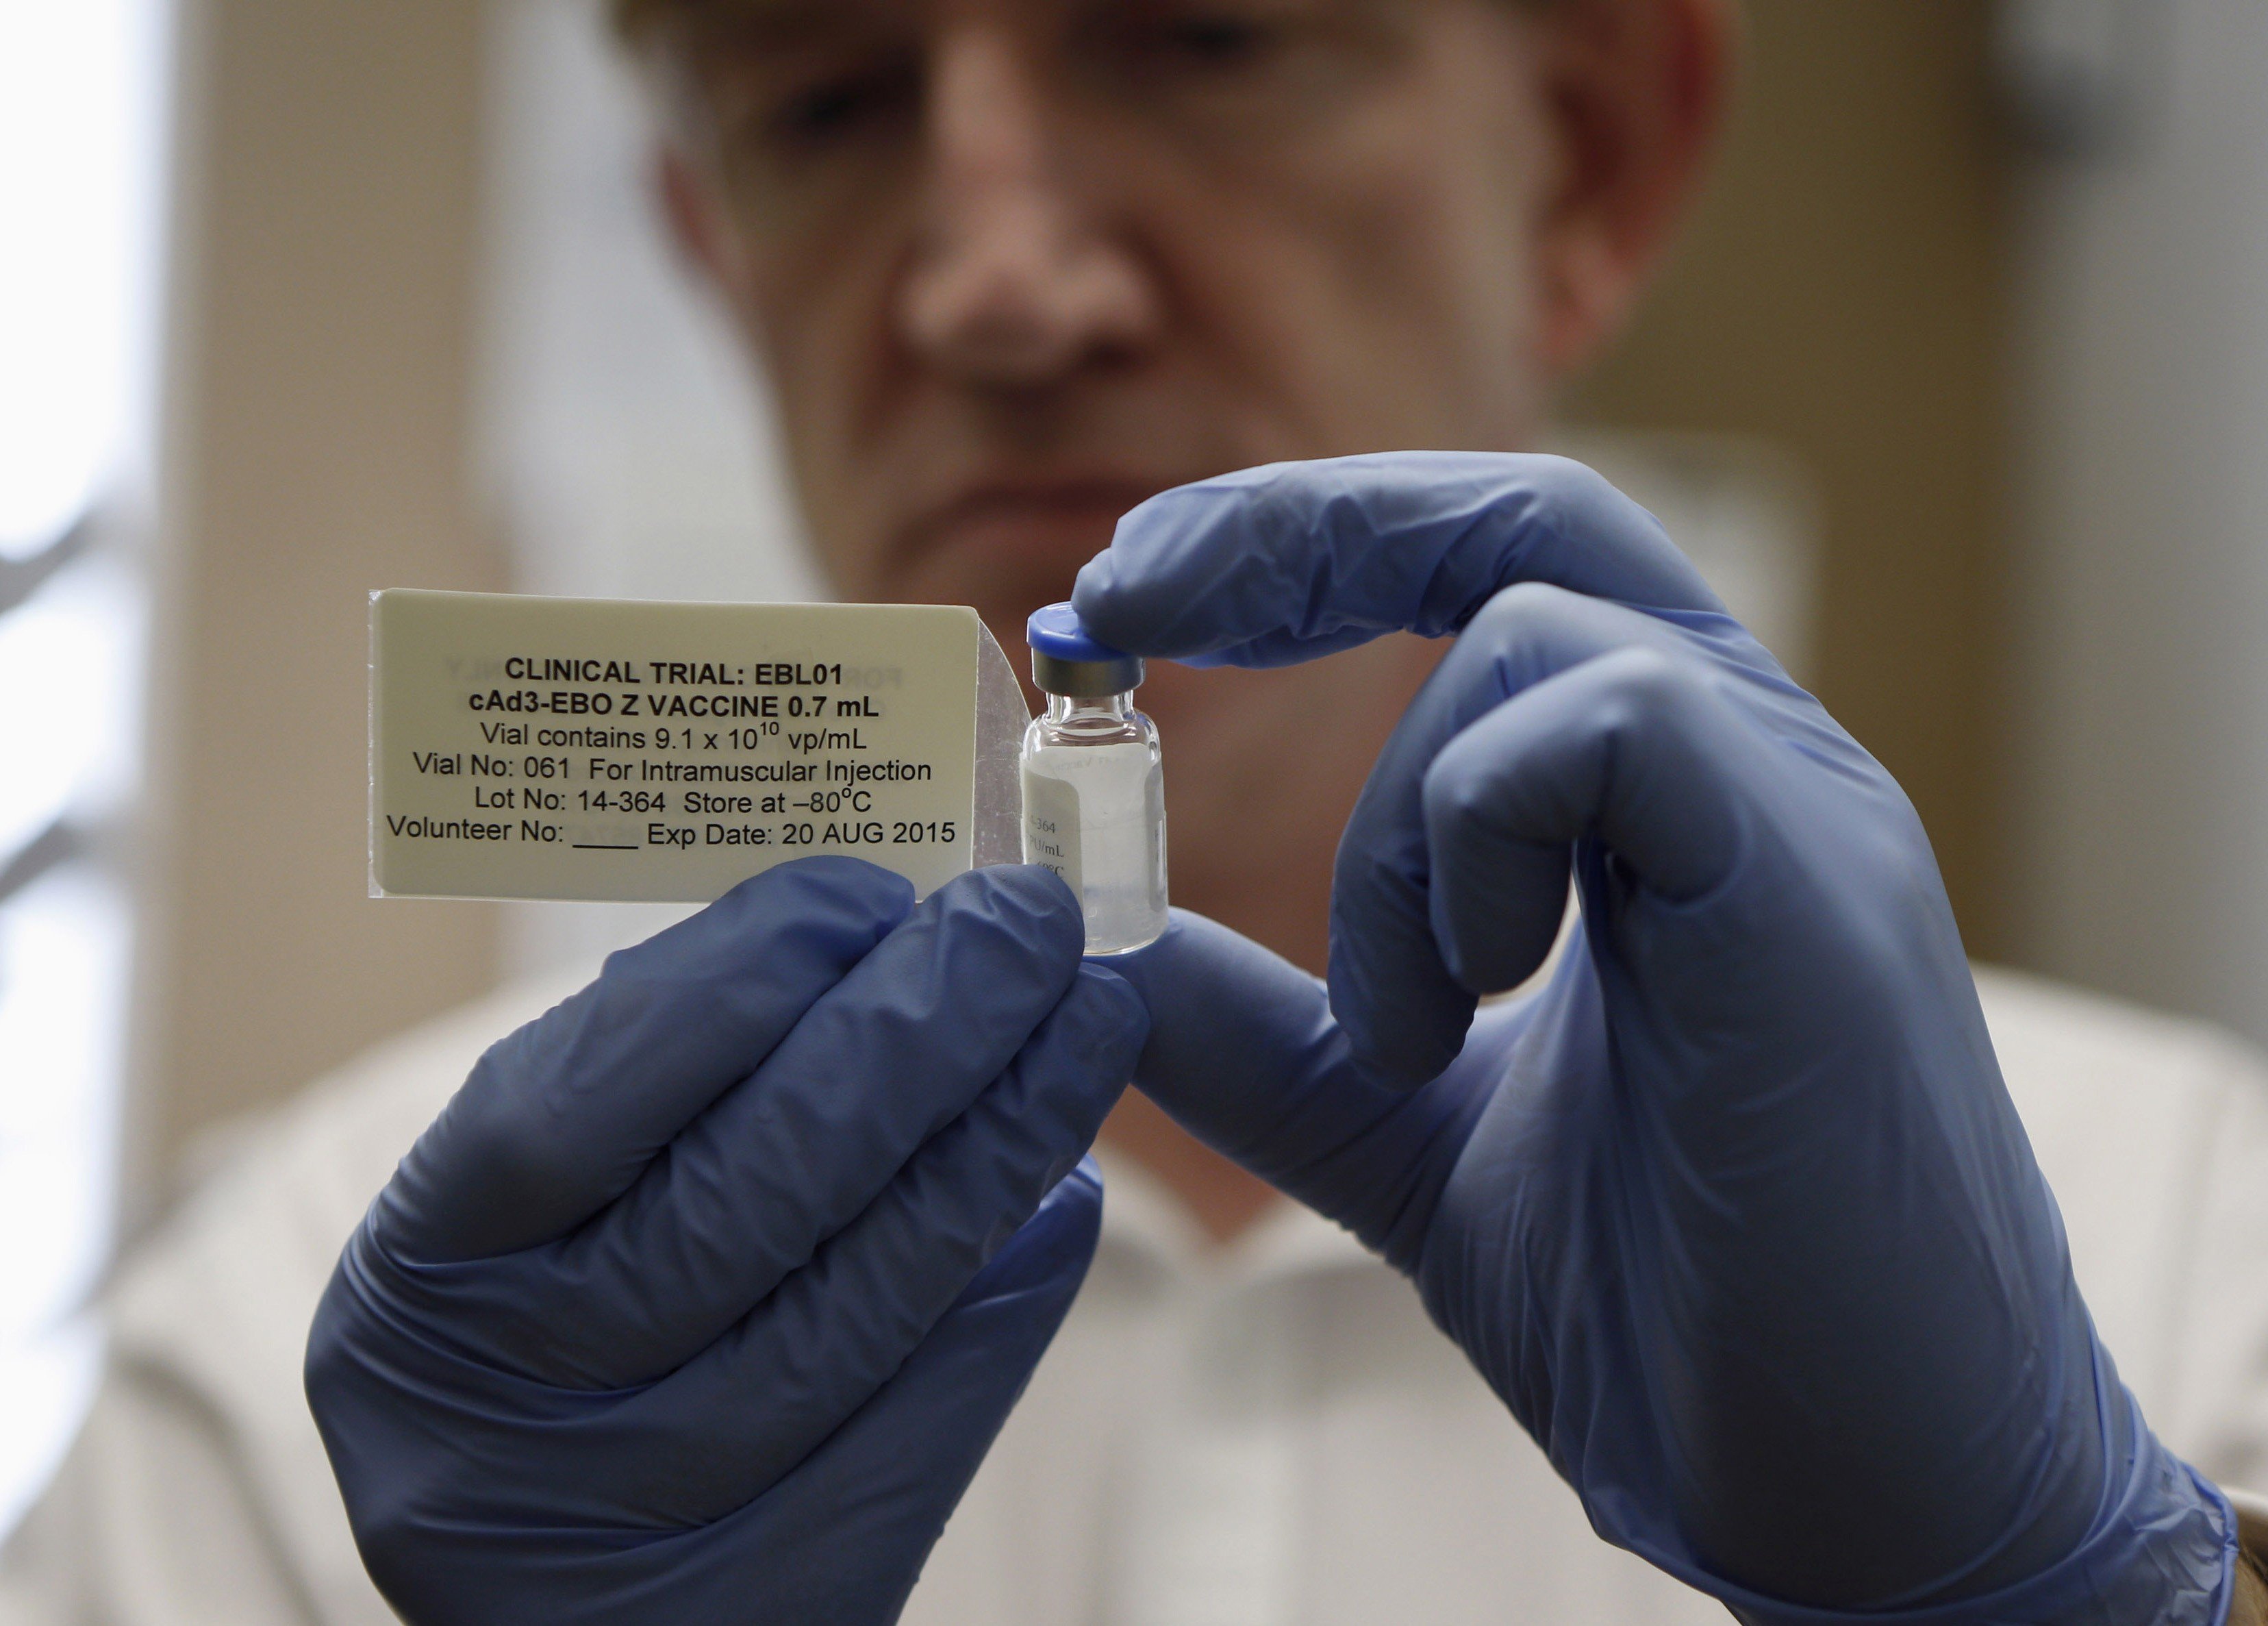 Professor Adrian Hill, Director of the Jenner Institute, and Chief Investigator of the trials, holds a phial containing the Ebola vaccine at the Oxford Vaccine Group Centre for Clinical Vaccinology and Tropical Medicine (CCVTM) in Oxford, southern England on Sept. 17, 2014. 